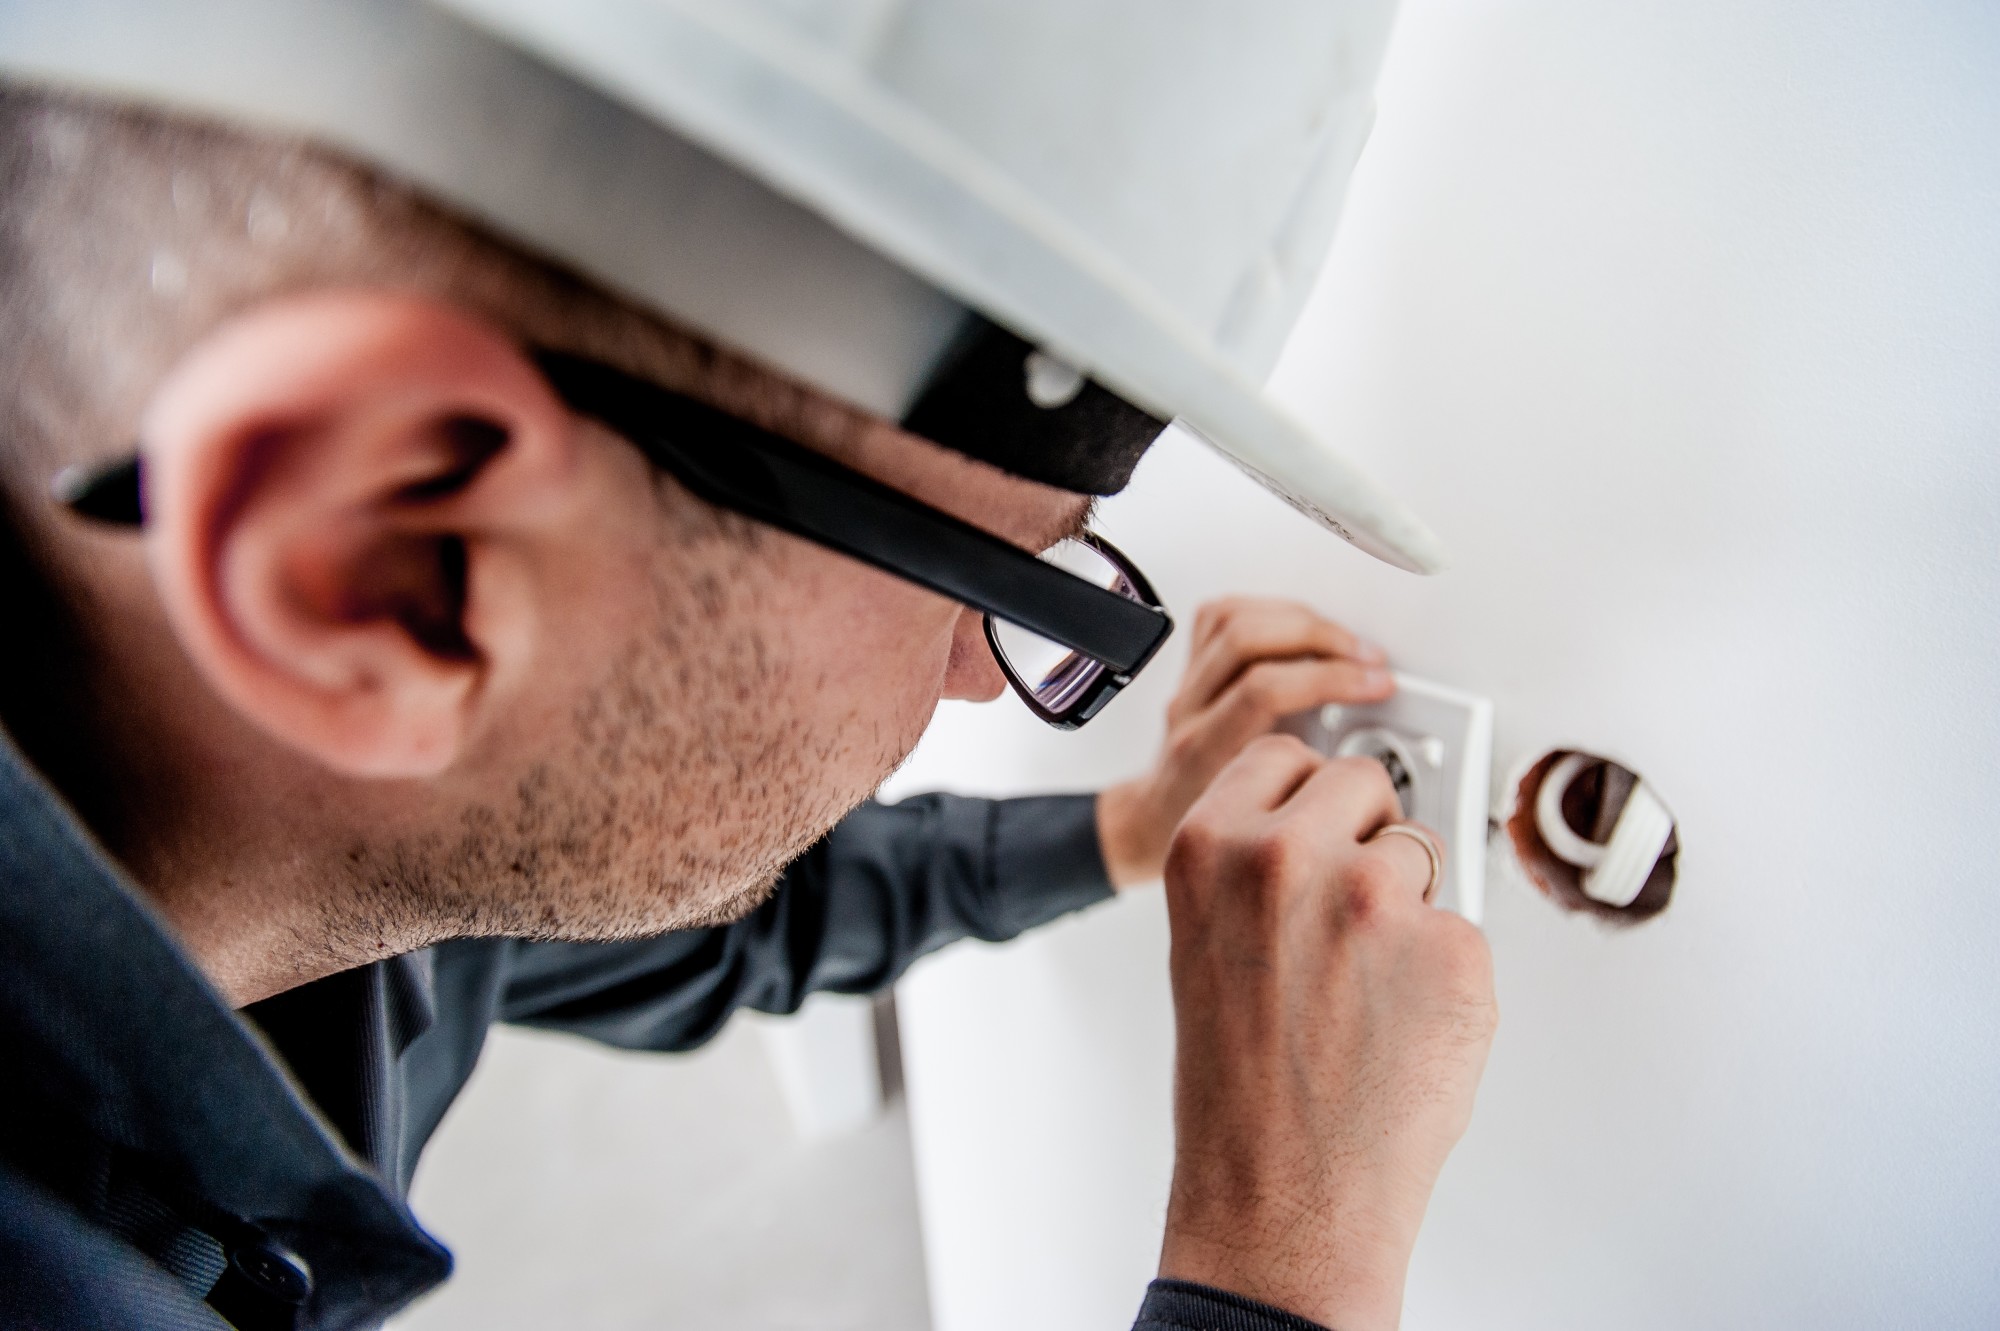 If you need a new electrical outlet installation, should you hire a professional electrician? Learn the answer in this guide.